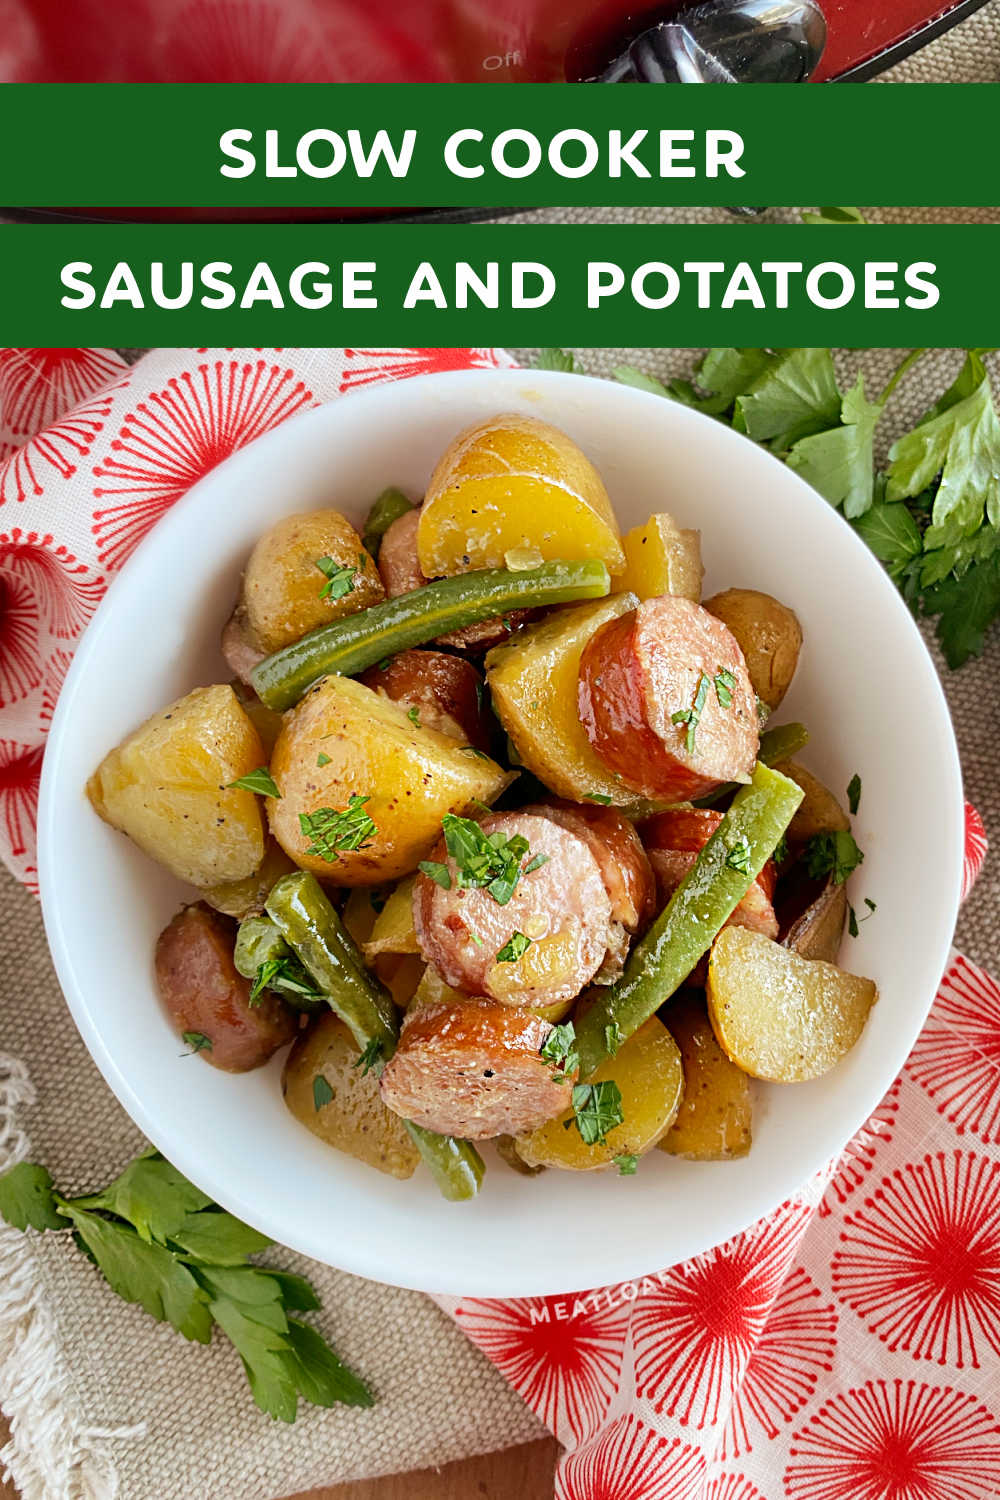 This Slow Cooker Sausage and Potatoes recipe is an easy dinner made in the crock pot with kielbasa smoked sausage, baby potatoes and green beans. Your whole family will love this delicious comfort food made with just a few simple ingredients! via @meamel